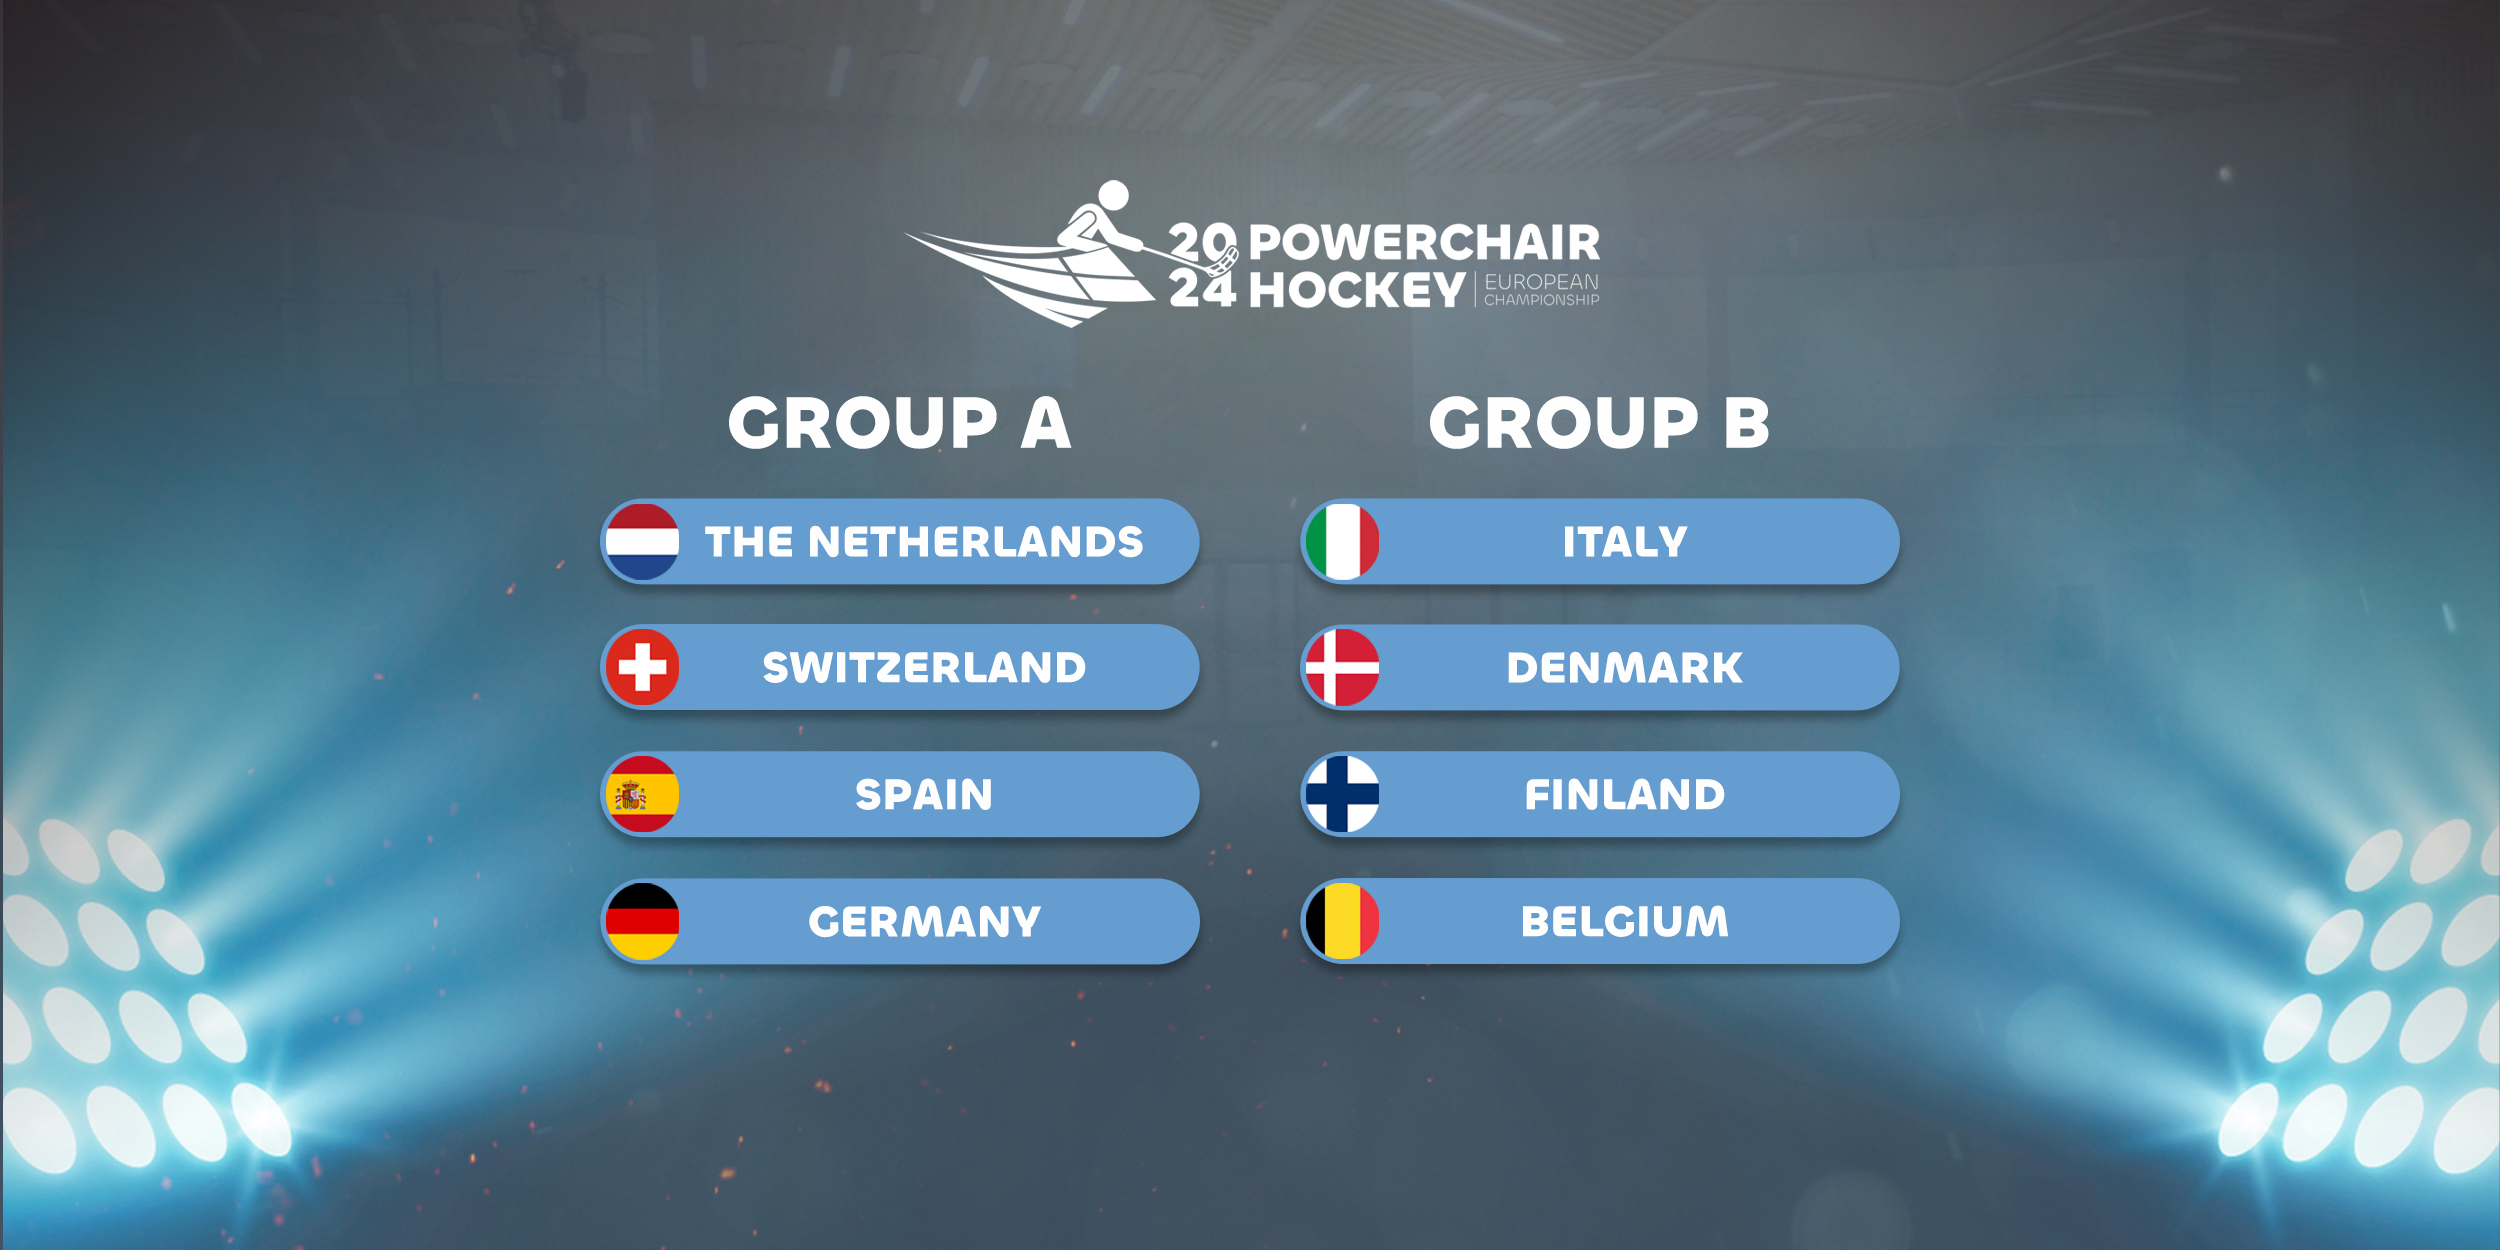 the groups of the European Championship, with in Group A The Netherlands, Switzerland, Spain and Germany. In Group B we find Italy, Denmark, Finland and Belgium.